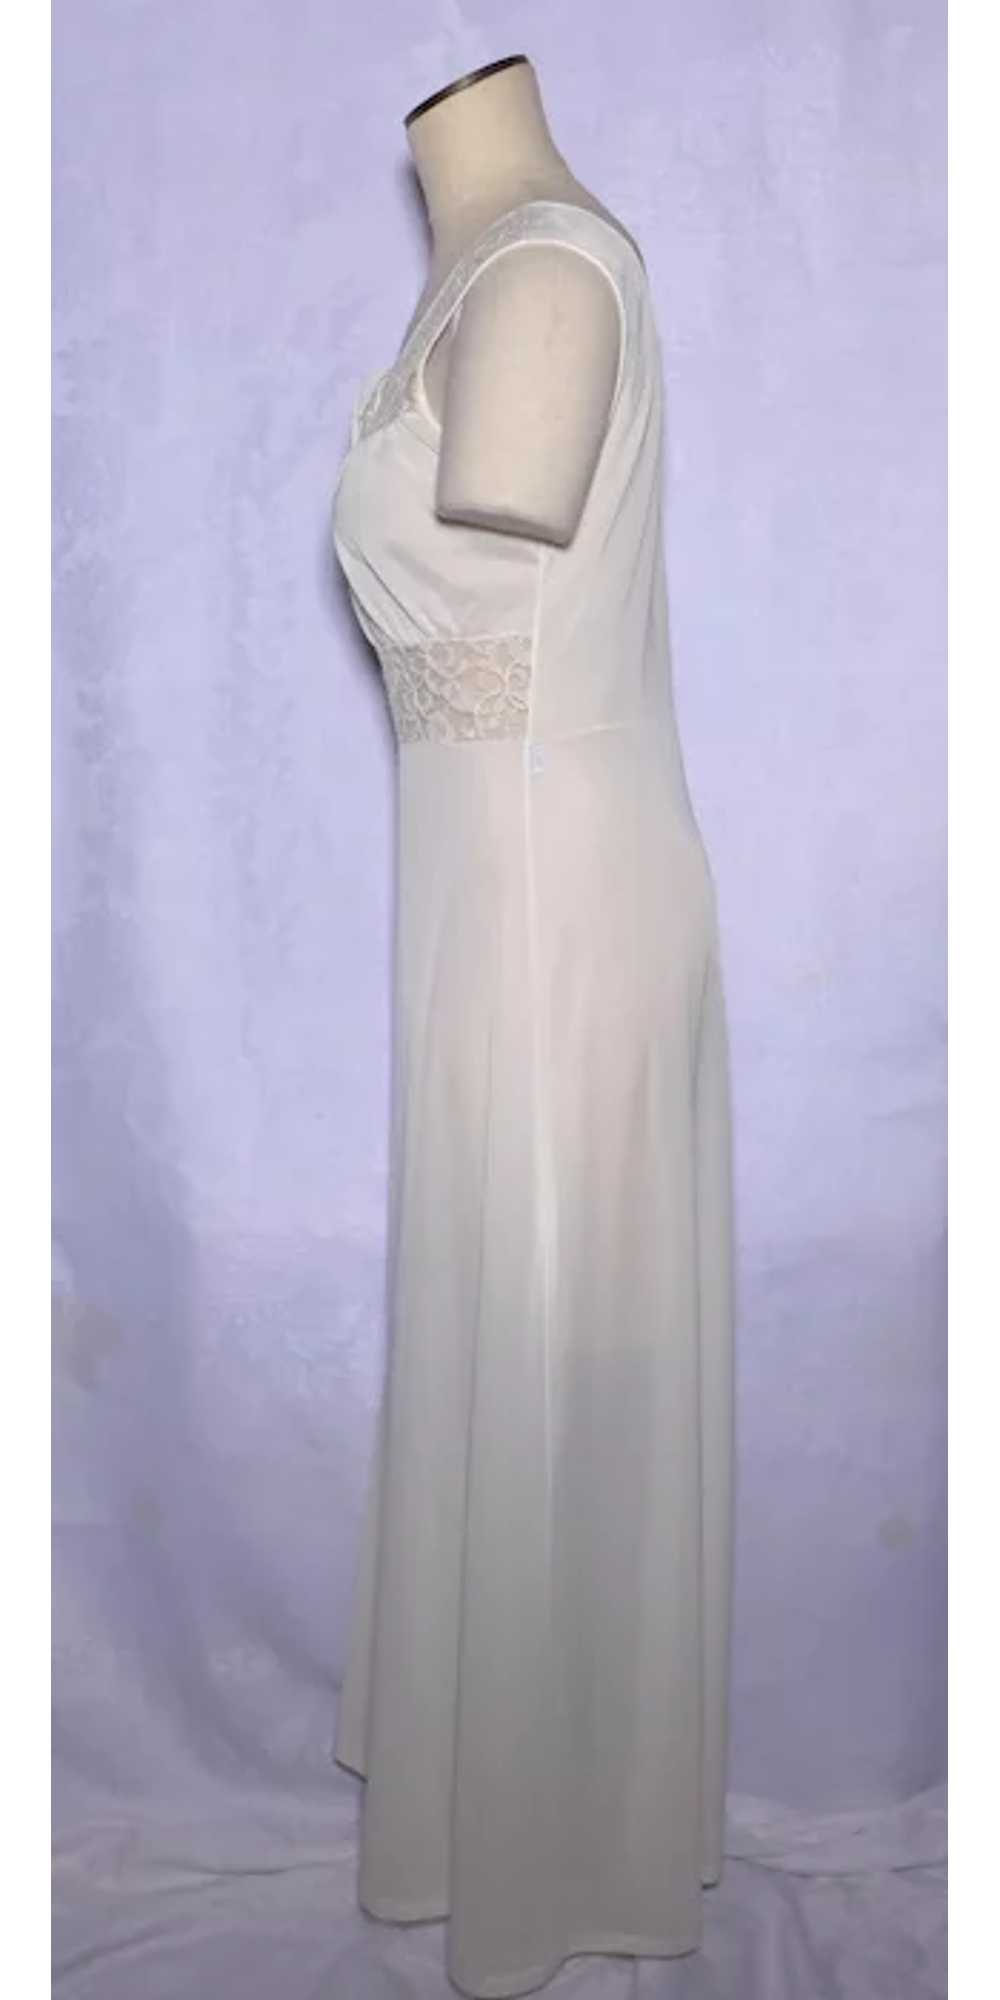 Vintage 1950s Radcliffe Nightgown Full Length Whi… - image 2